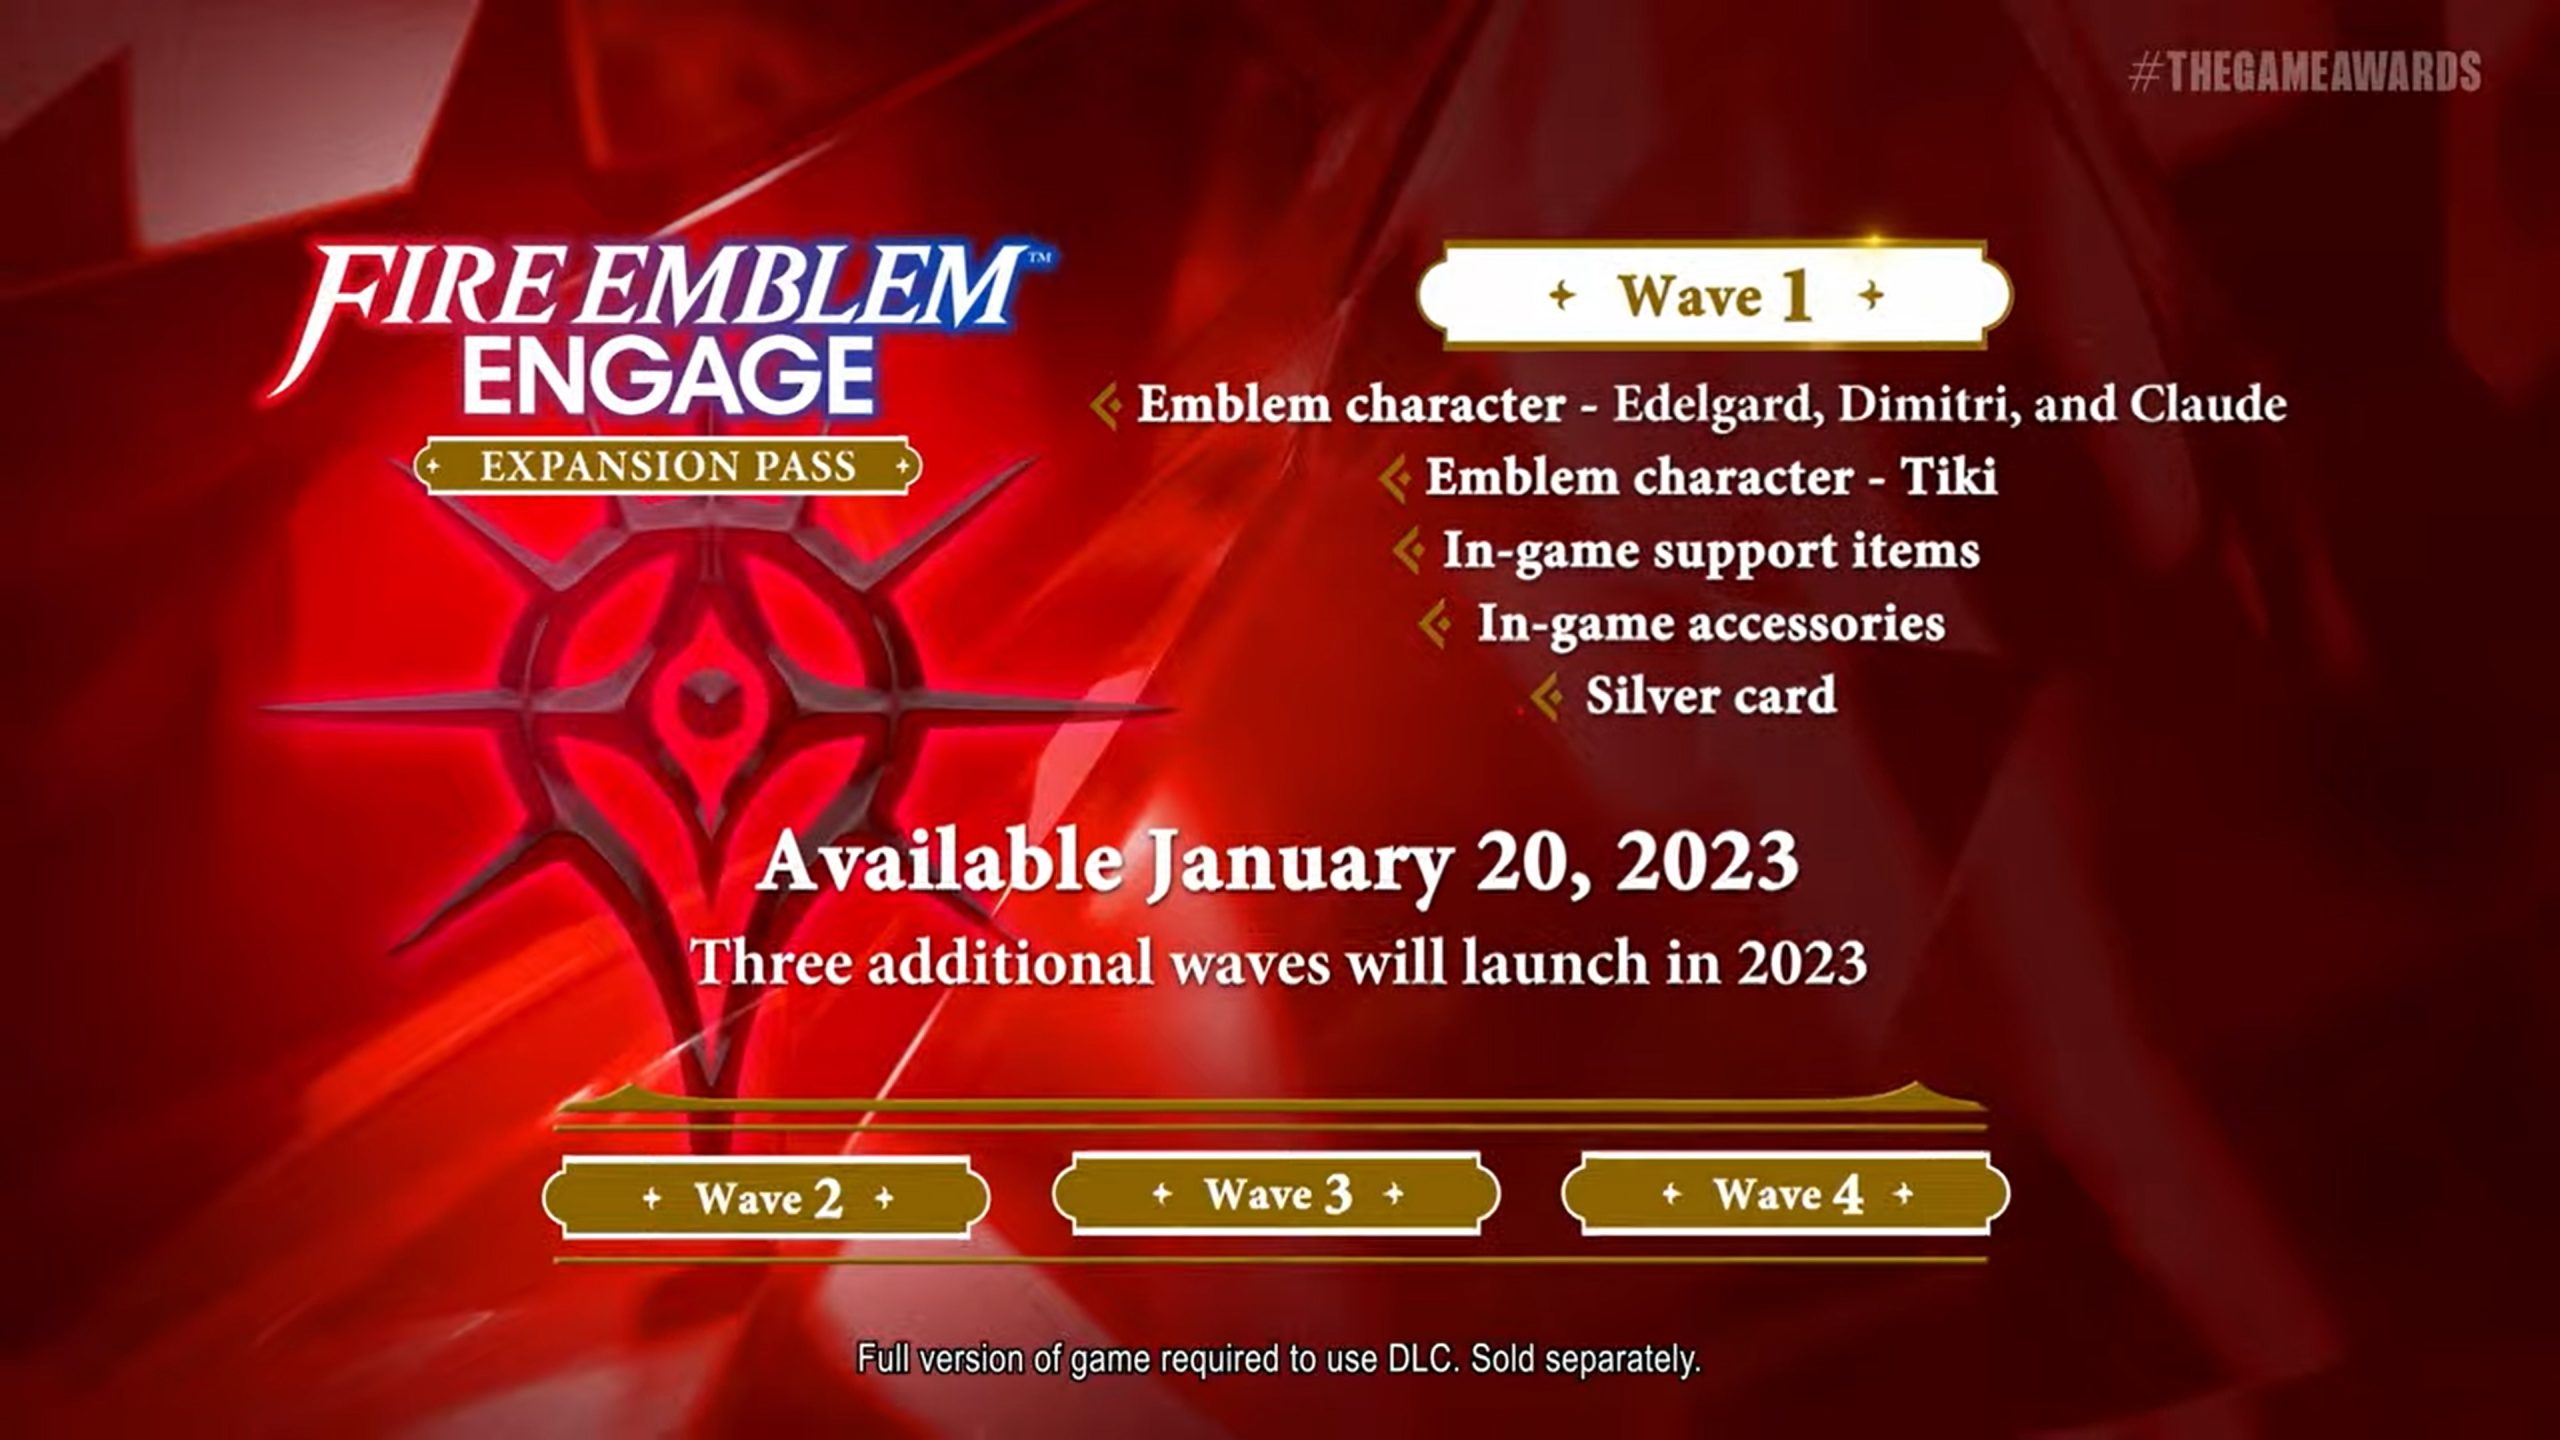 Nintendo reveals the Expansion Pass for Fire Emblem Engage | RPG Site